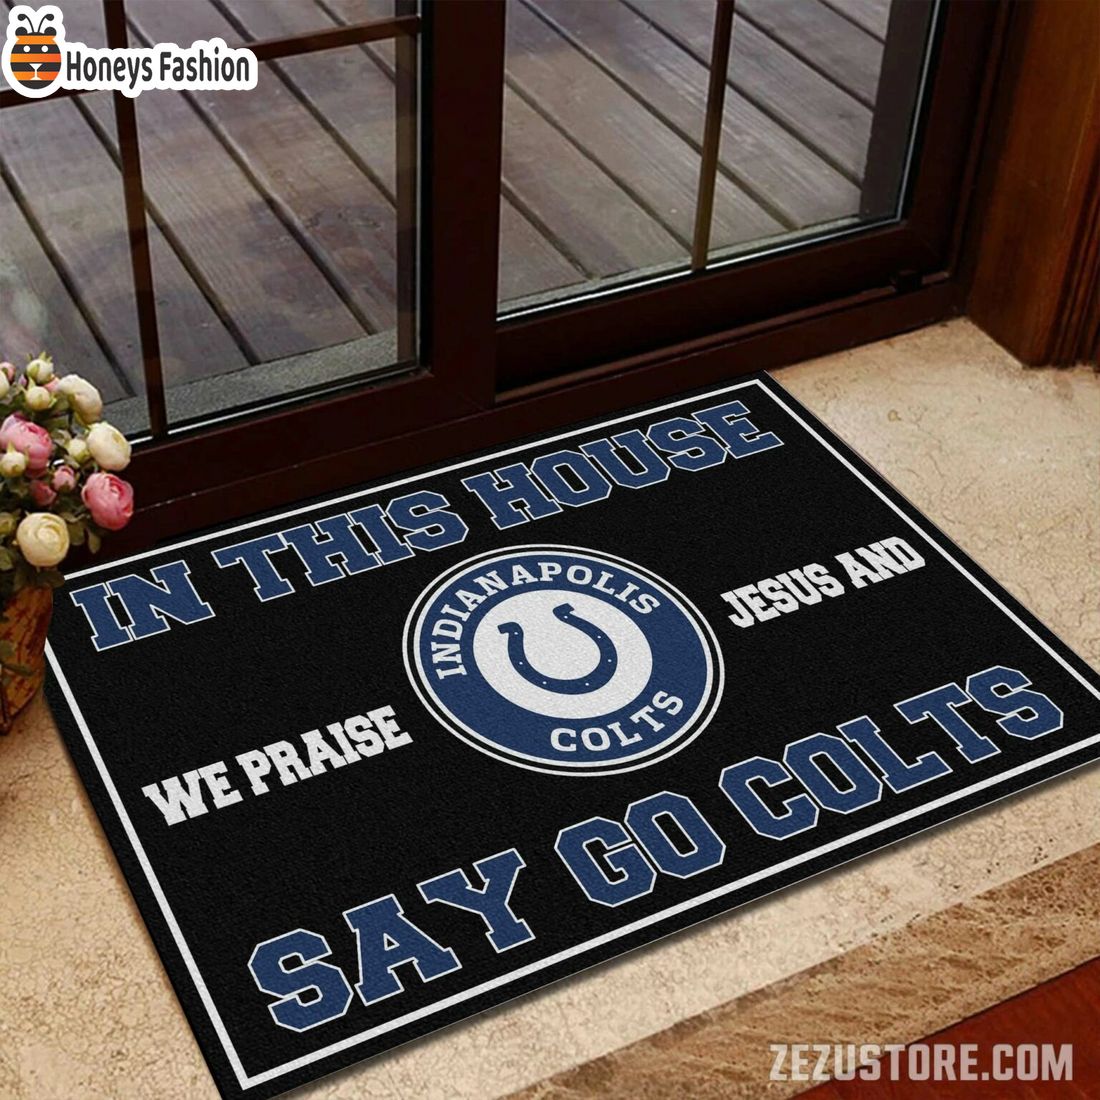 In this house we praise jesus and say go Colts doormat